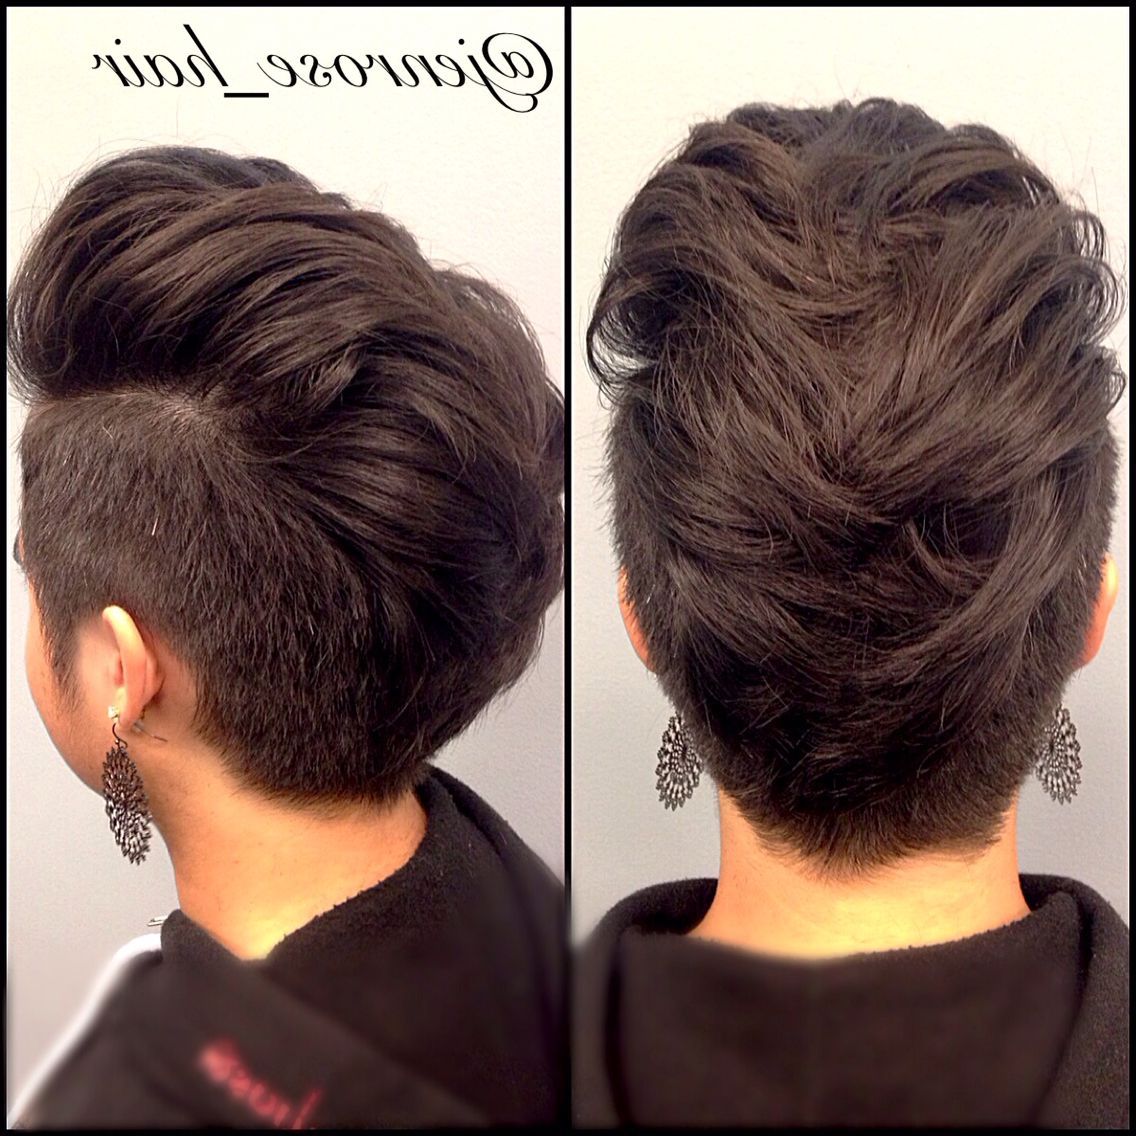 Women's Faux Hawk With Shaved Sides. Shorts Women's Hair Cut (View 7 of 20)